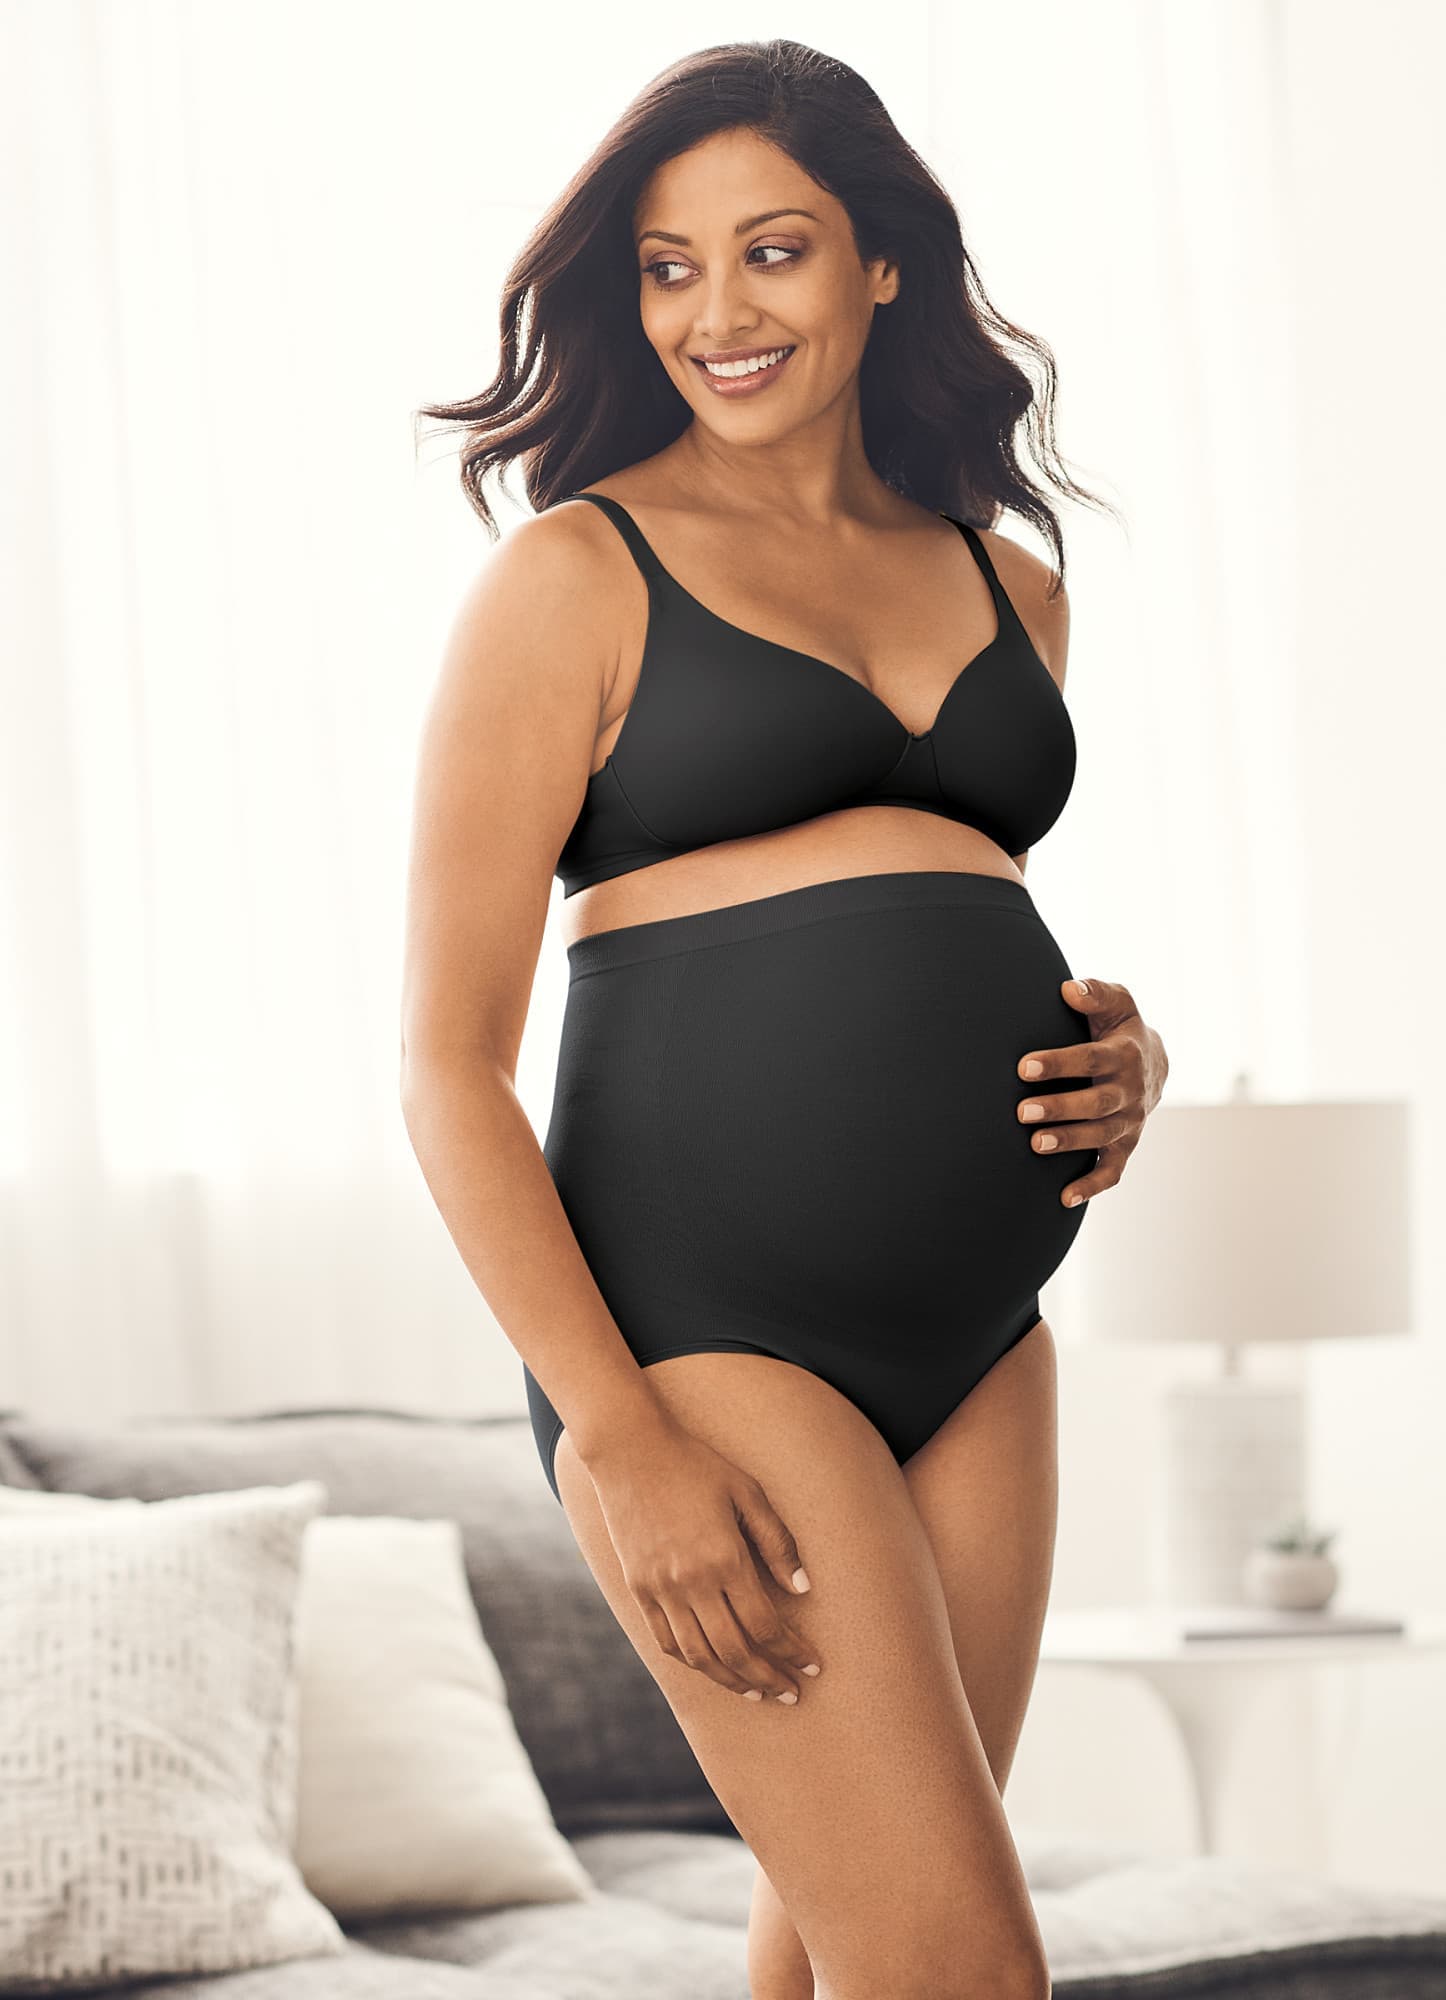 Graphene Maternity Underwear with High Waist and Belly Support